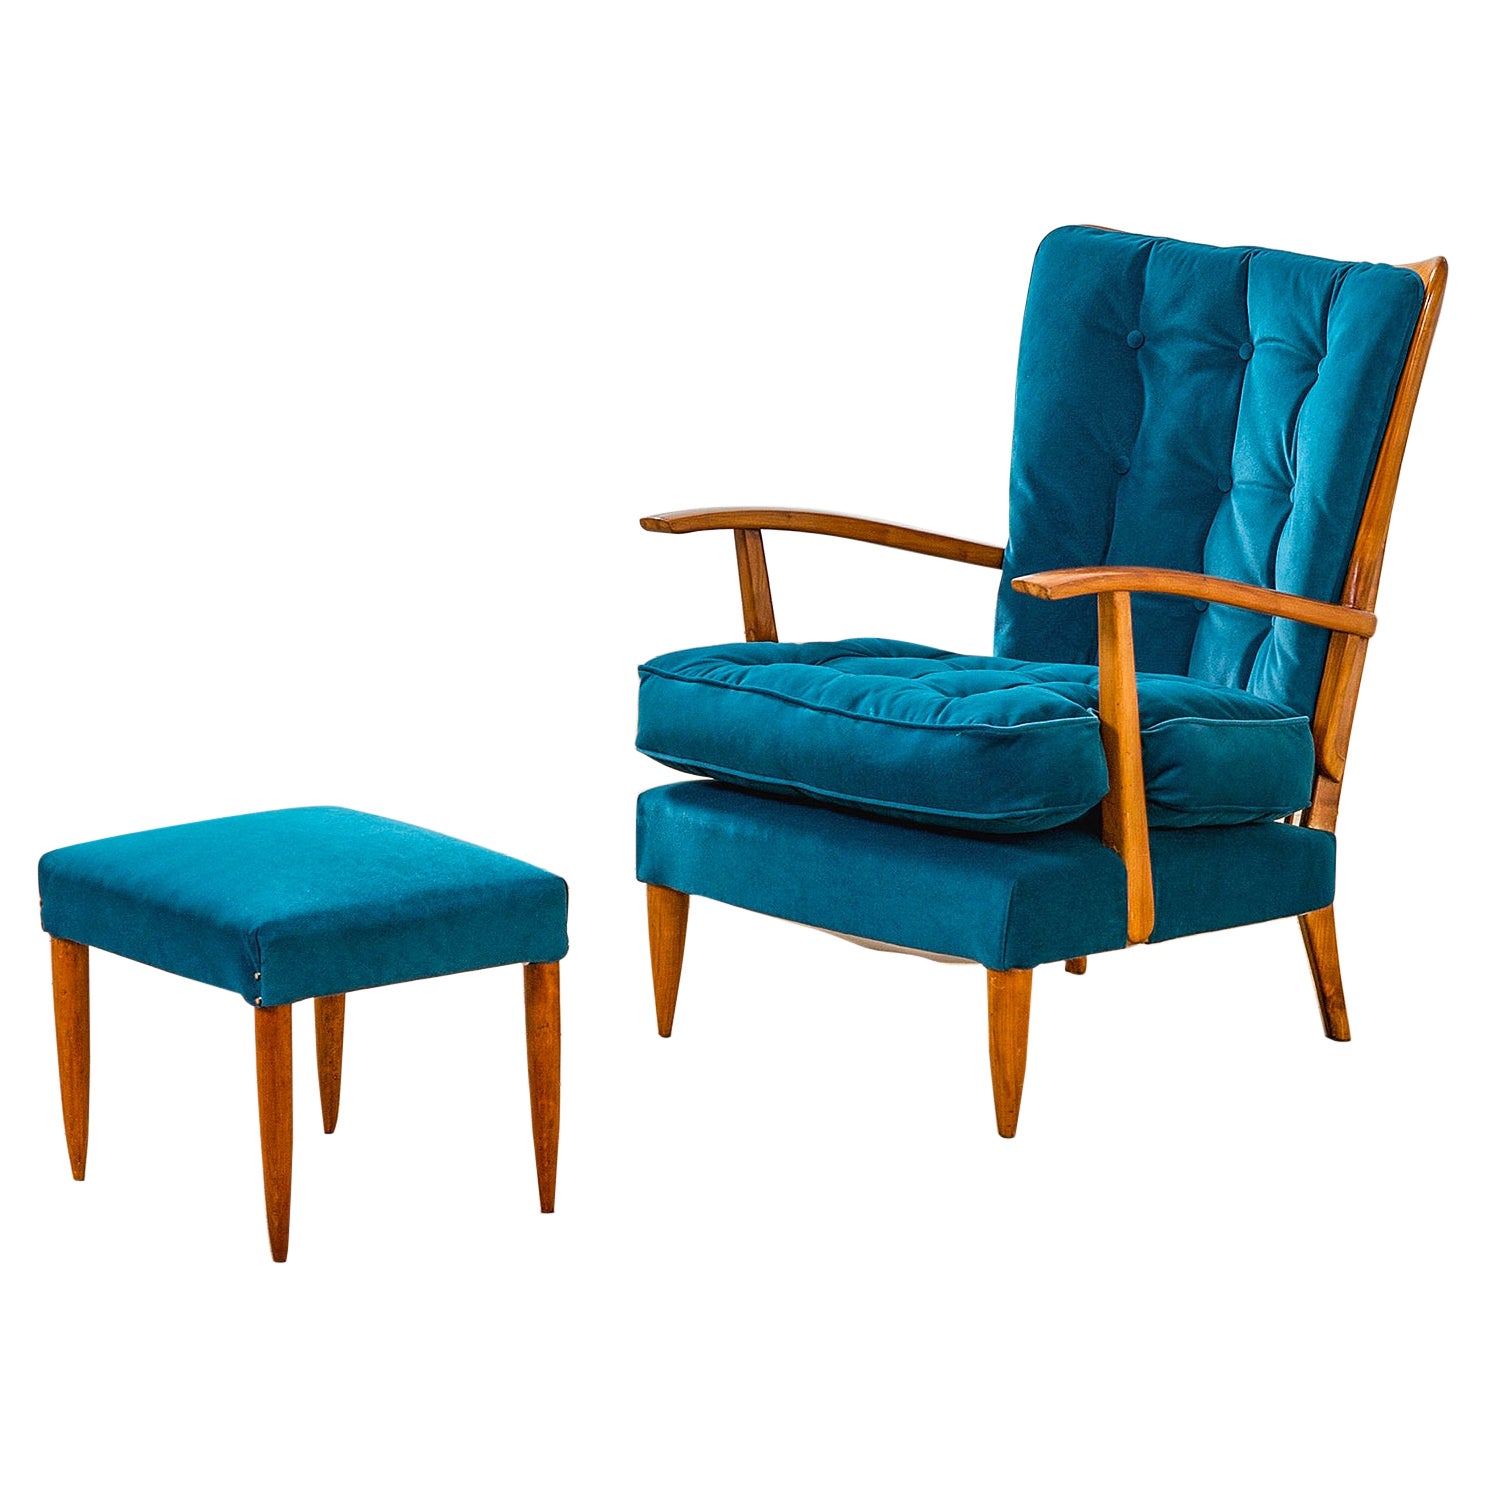 20th Century Paolo Buffa Armchair & Pouf in Wood and Upholstery for Marelli, 50s